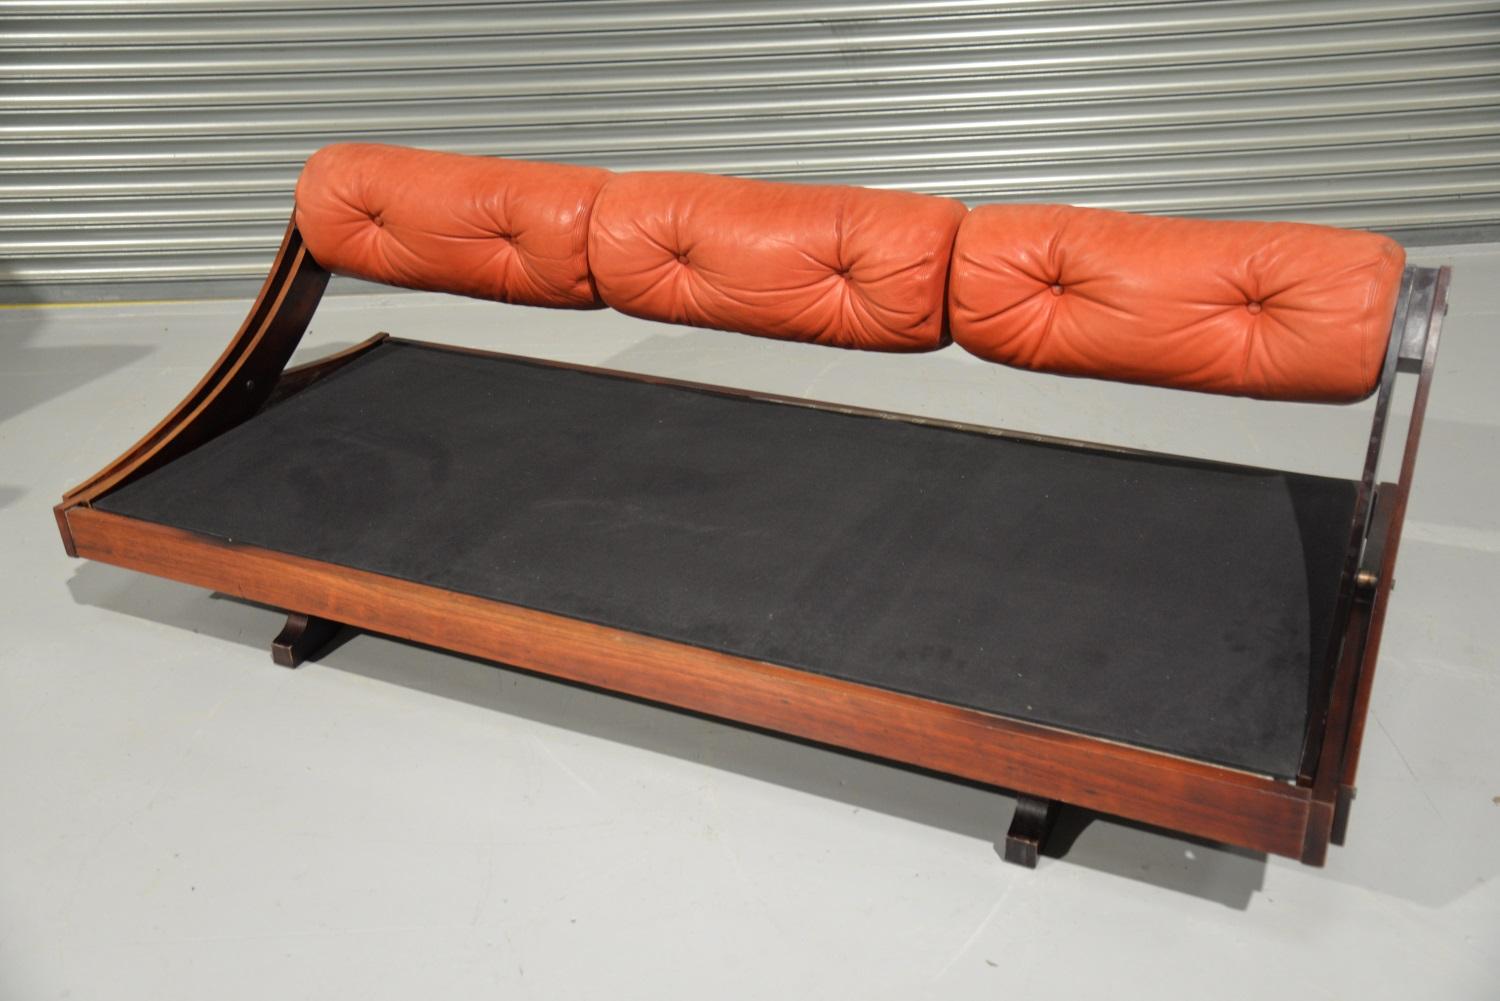 Gianni Songia Daybed/Sofa Designed for Sormani of Italy, 1963 For Sale 5